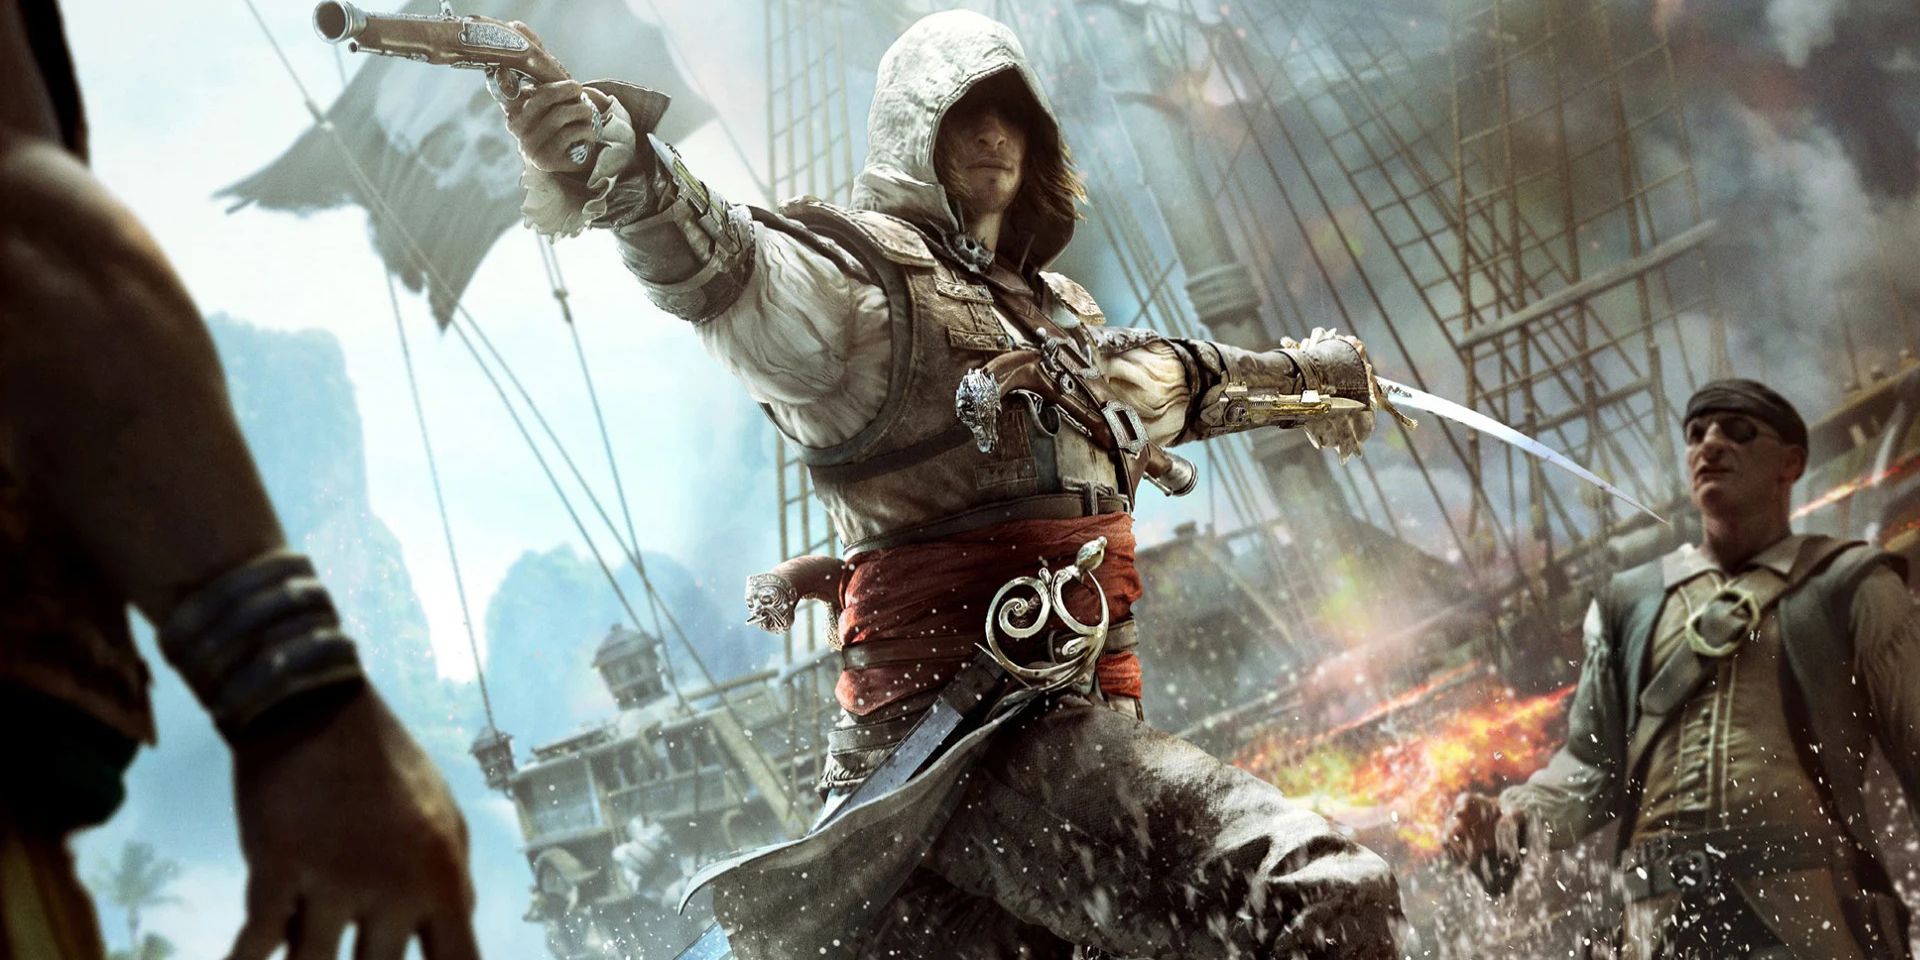 Edward Kenway aims his pistol and his sword at enemies in Assassin's Creed 4: Black Flag.